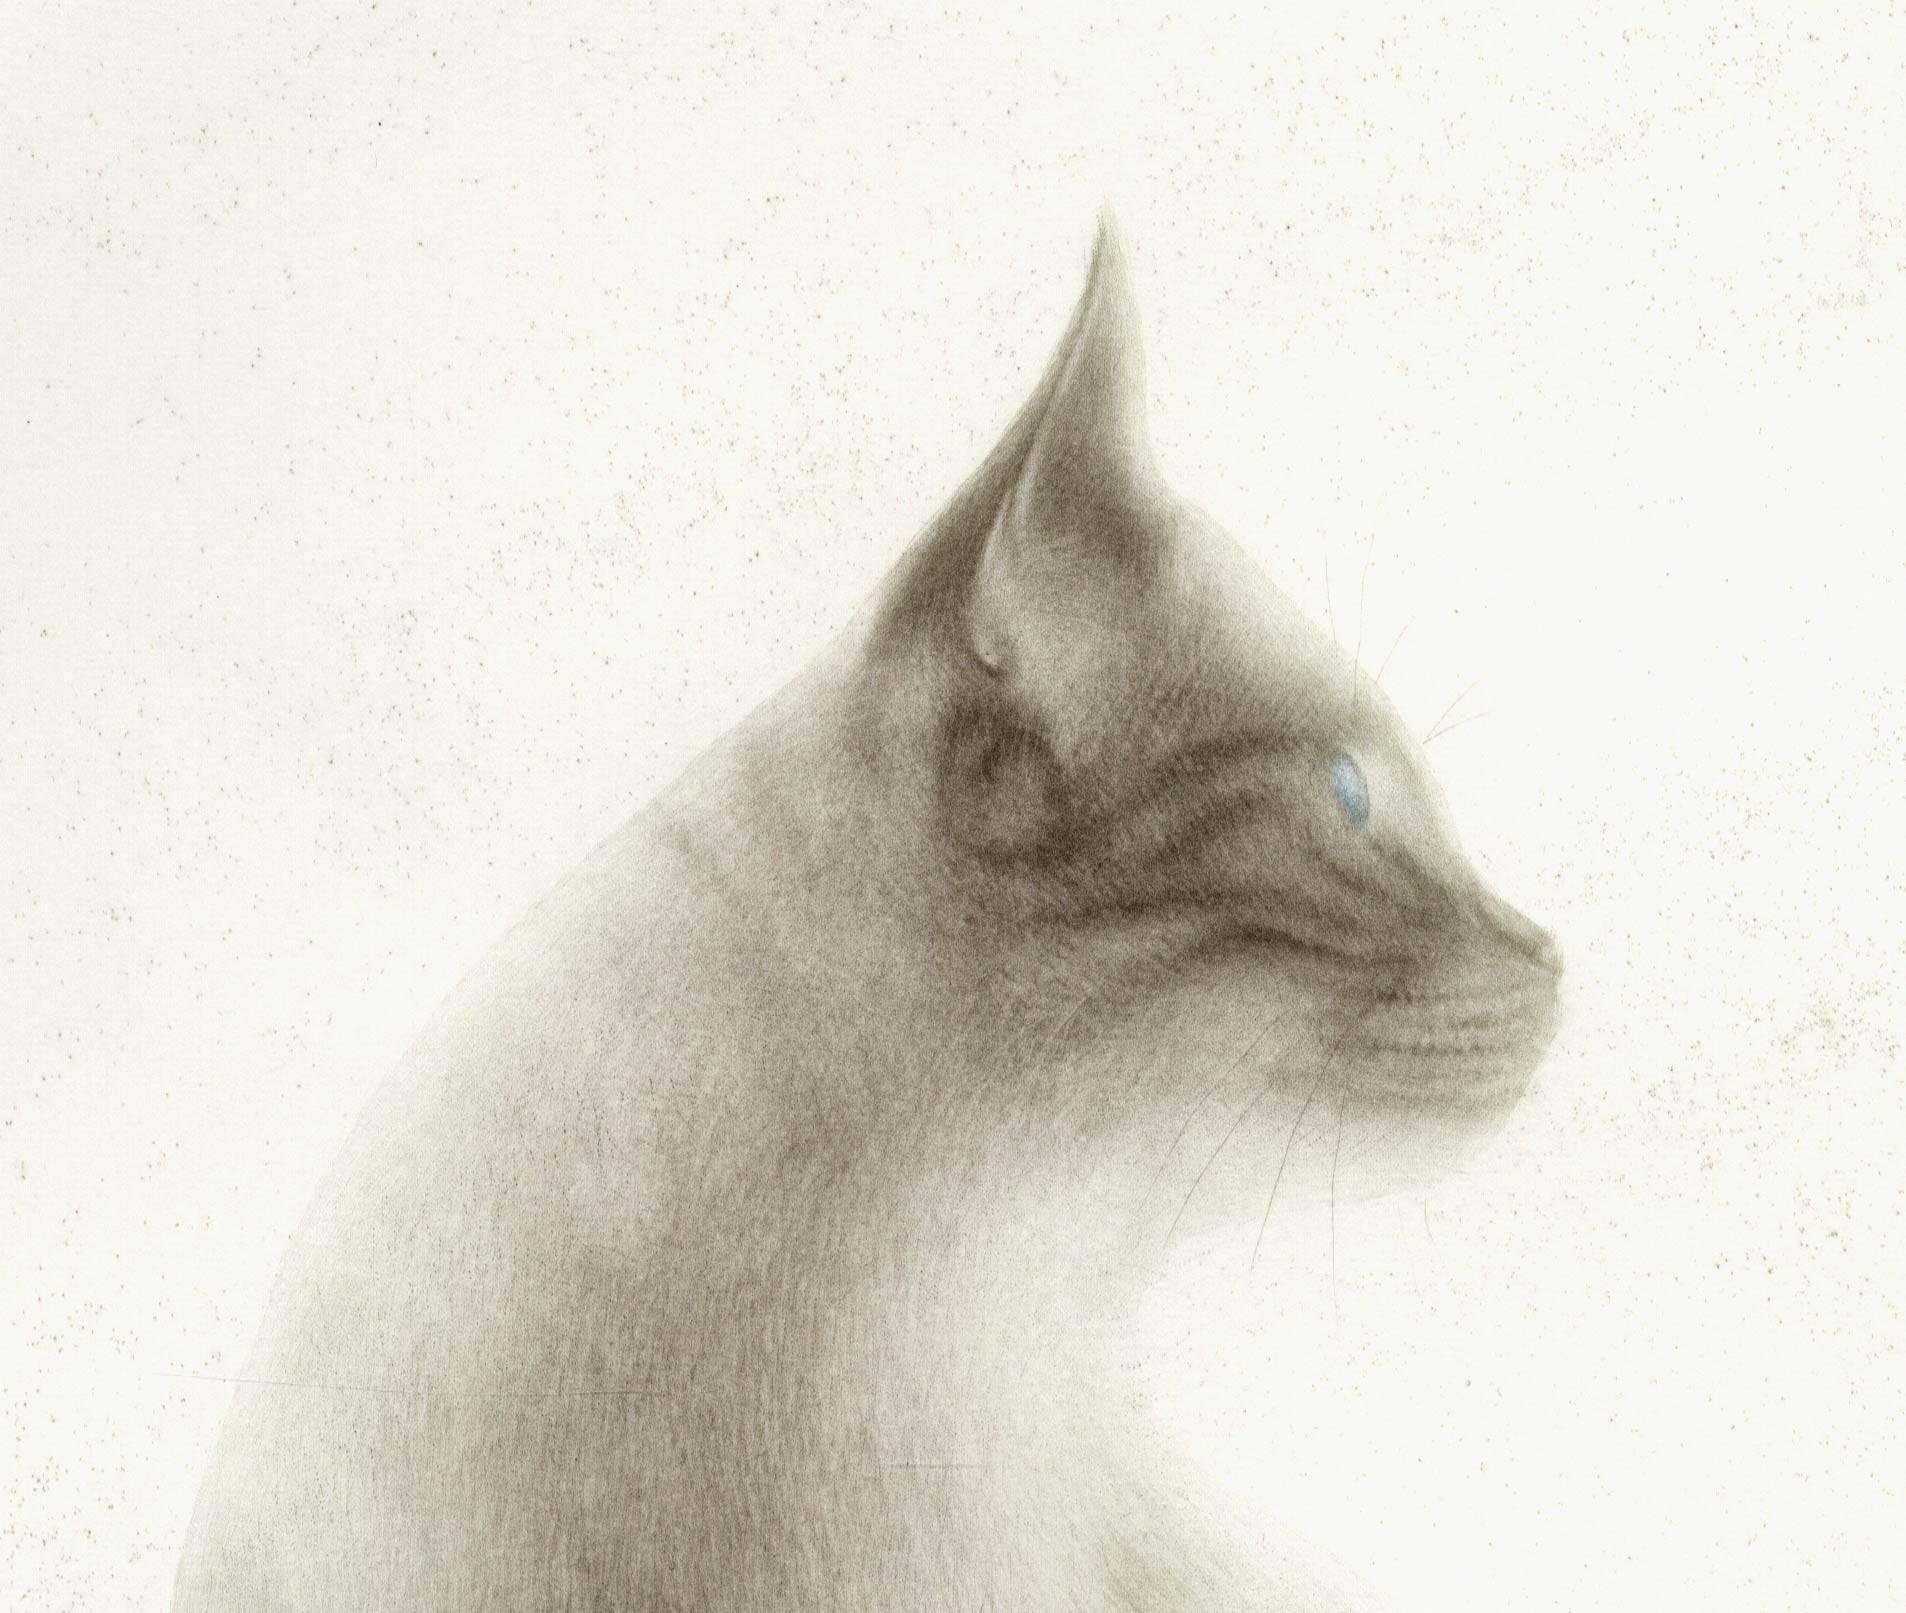 Shiro (portrait of an elegant, alert cat sitting in a meadow with flying insect) - Print by Mikio Watanabe